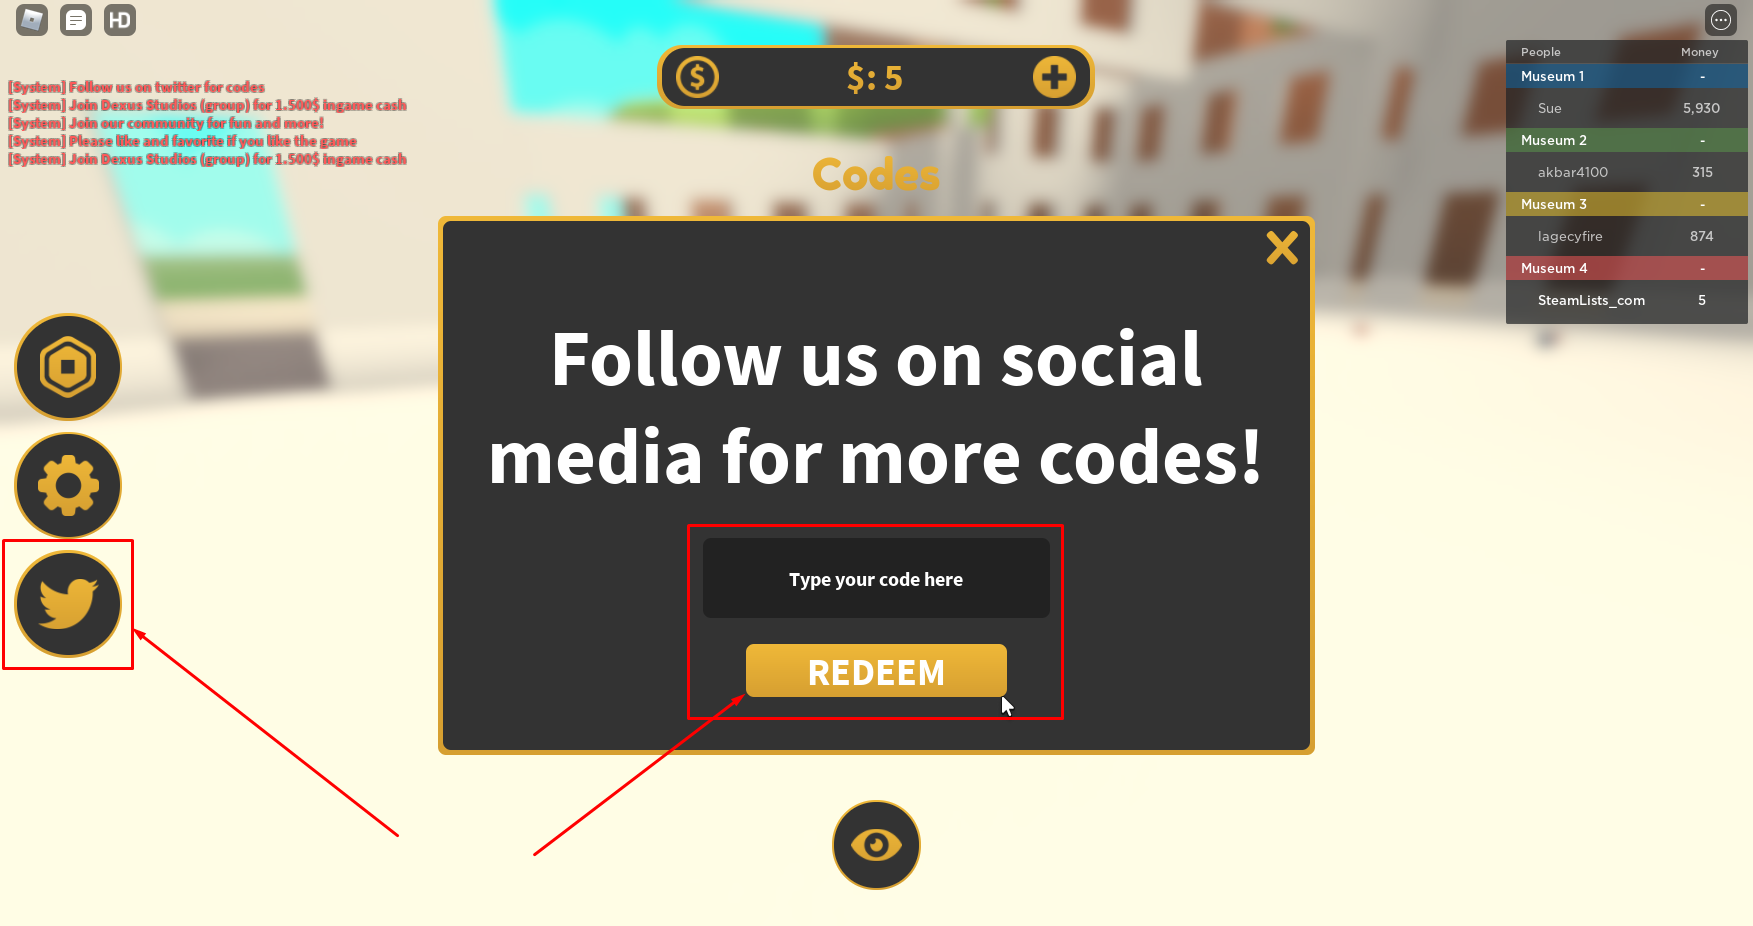 Roblox Museum Tycoon Codes Free Cash July 2021 Steam Lists - game dev tycoon cash to collect roblox